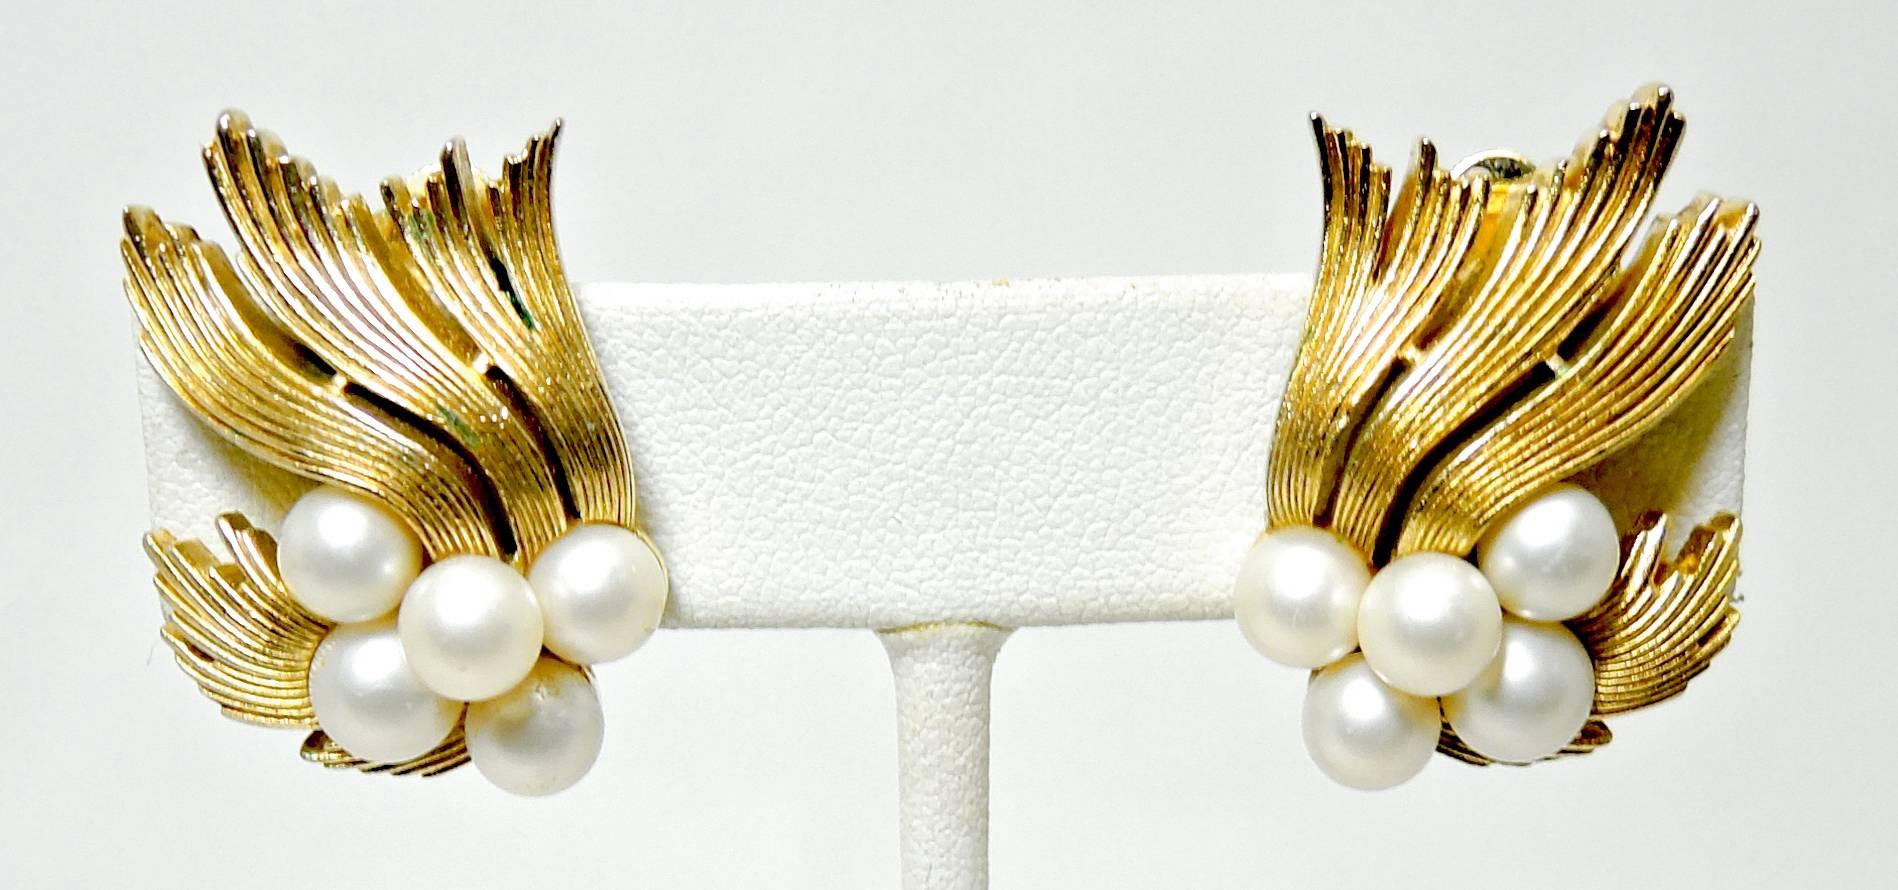 These are a pair of Trifari’s classic gold tone earrings that have their famous ribbons and faux pearls design. These clip earrings measure 1-1/8” x 1” and are signed “Trifari”. They are in excellent condition.